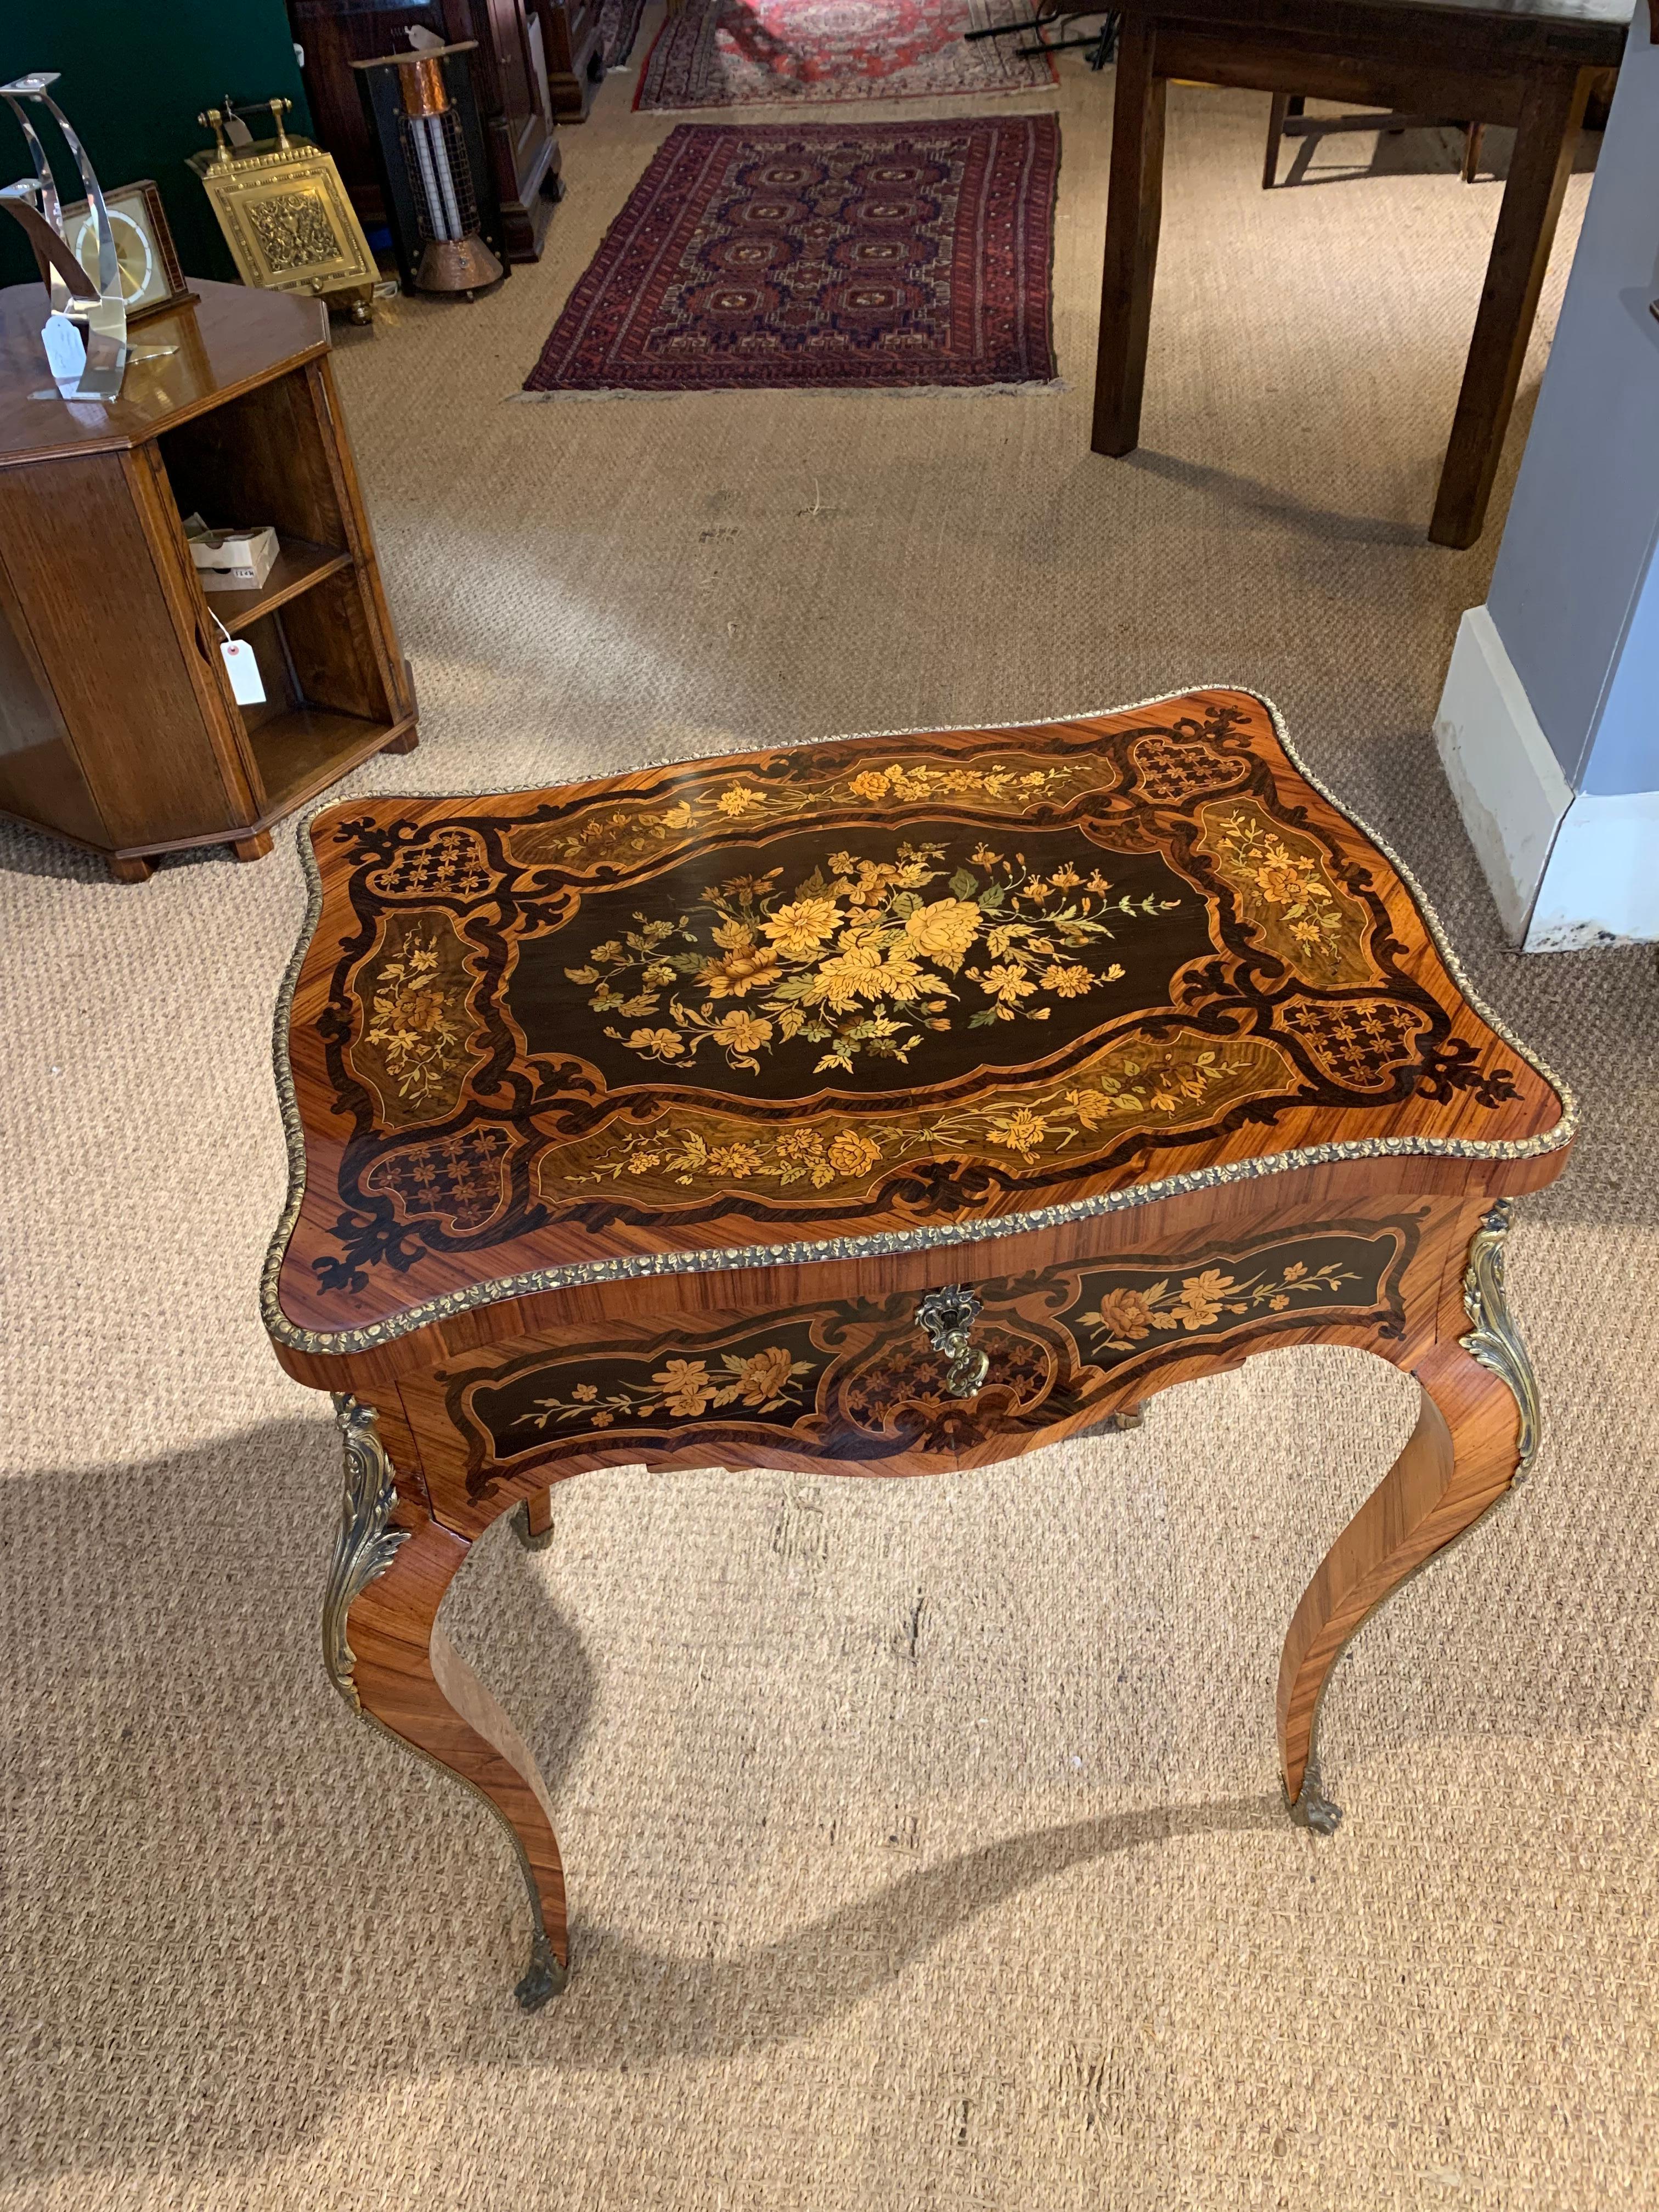 Stunning Napoleon III Kingwoood and inlaid work table / dressing table, lift up lid, single drawer over wooden basket for wool's

French circa 1870s with original ormolu mounts and working lock and key 

This piece has been through our workshops